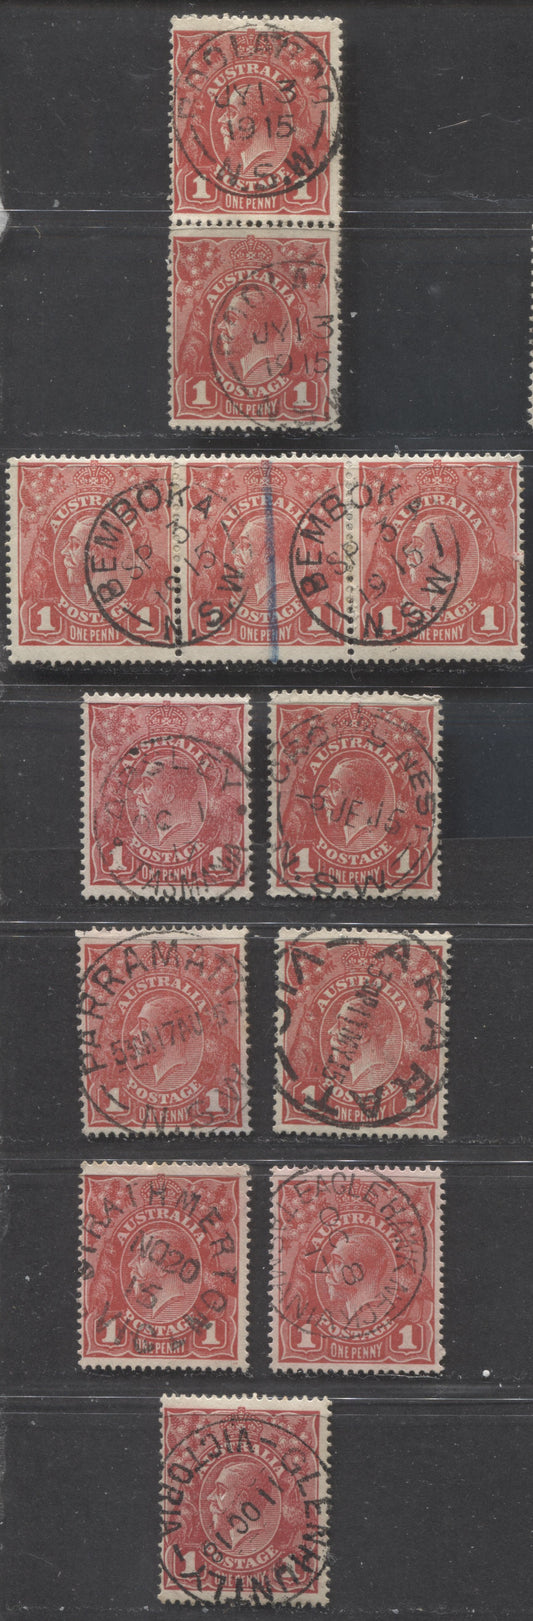 Lot 322 Australia SC#21-21 1914-1924 King George V Profile Heads, Perf. 14.25 x 14 Comb, Different Shades, All With SON Town Cancels, Including Crow's Nest, Eagle Hawk Neck and More!, 7 Fine & VF Used Singles, Pair & Strip of 3, Estimated Value $25